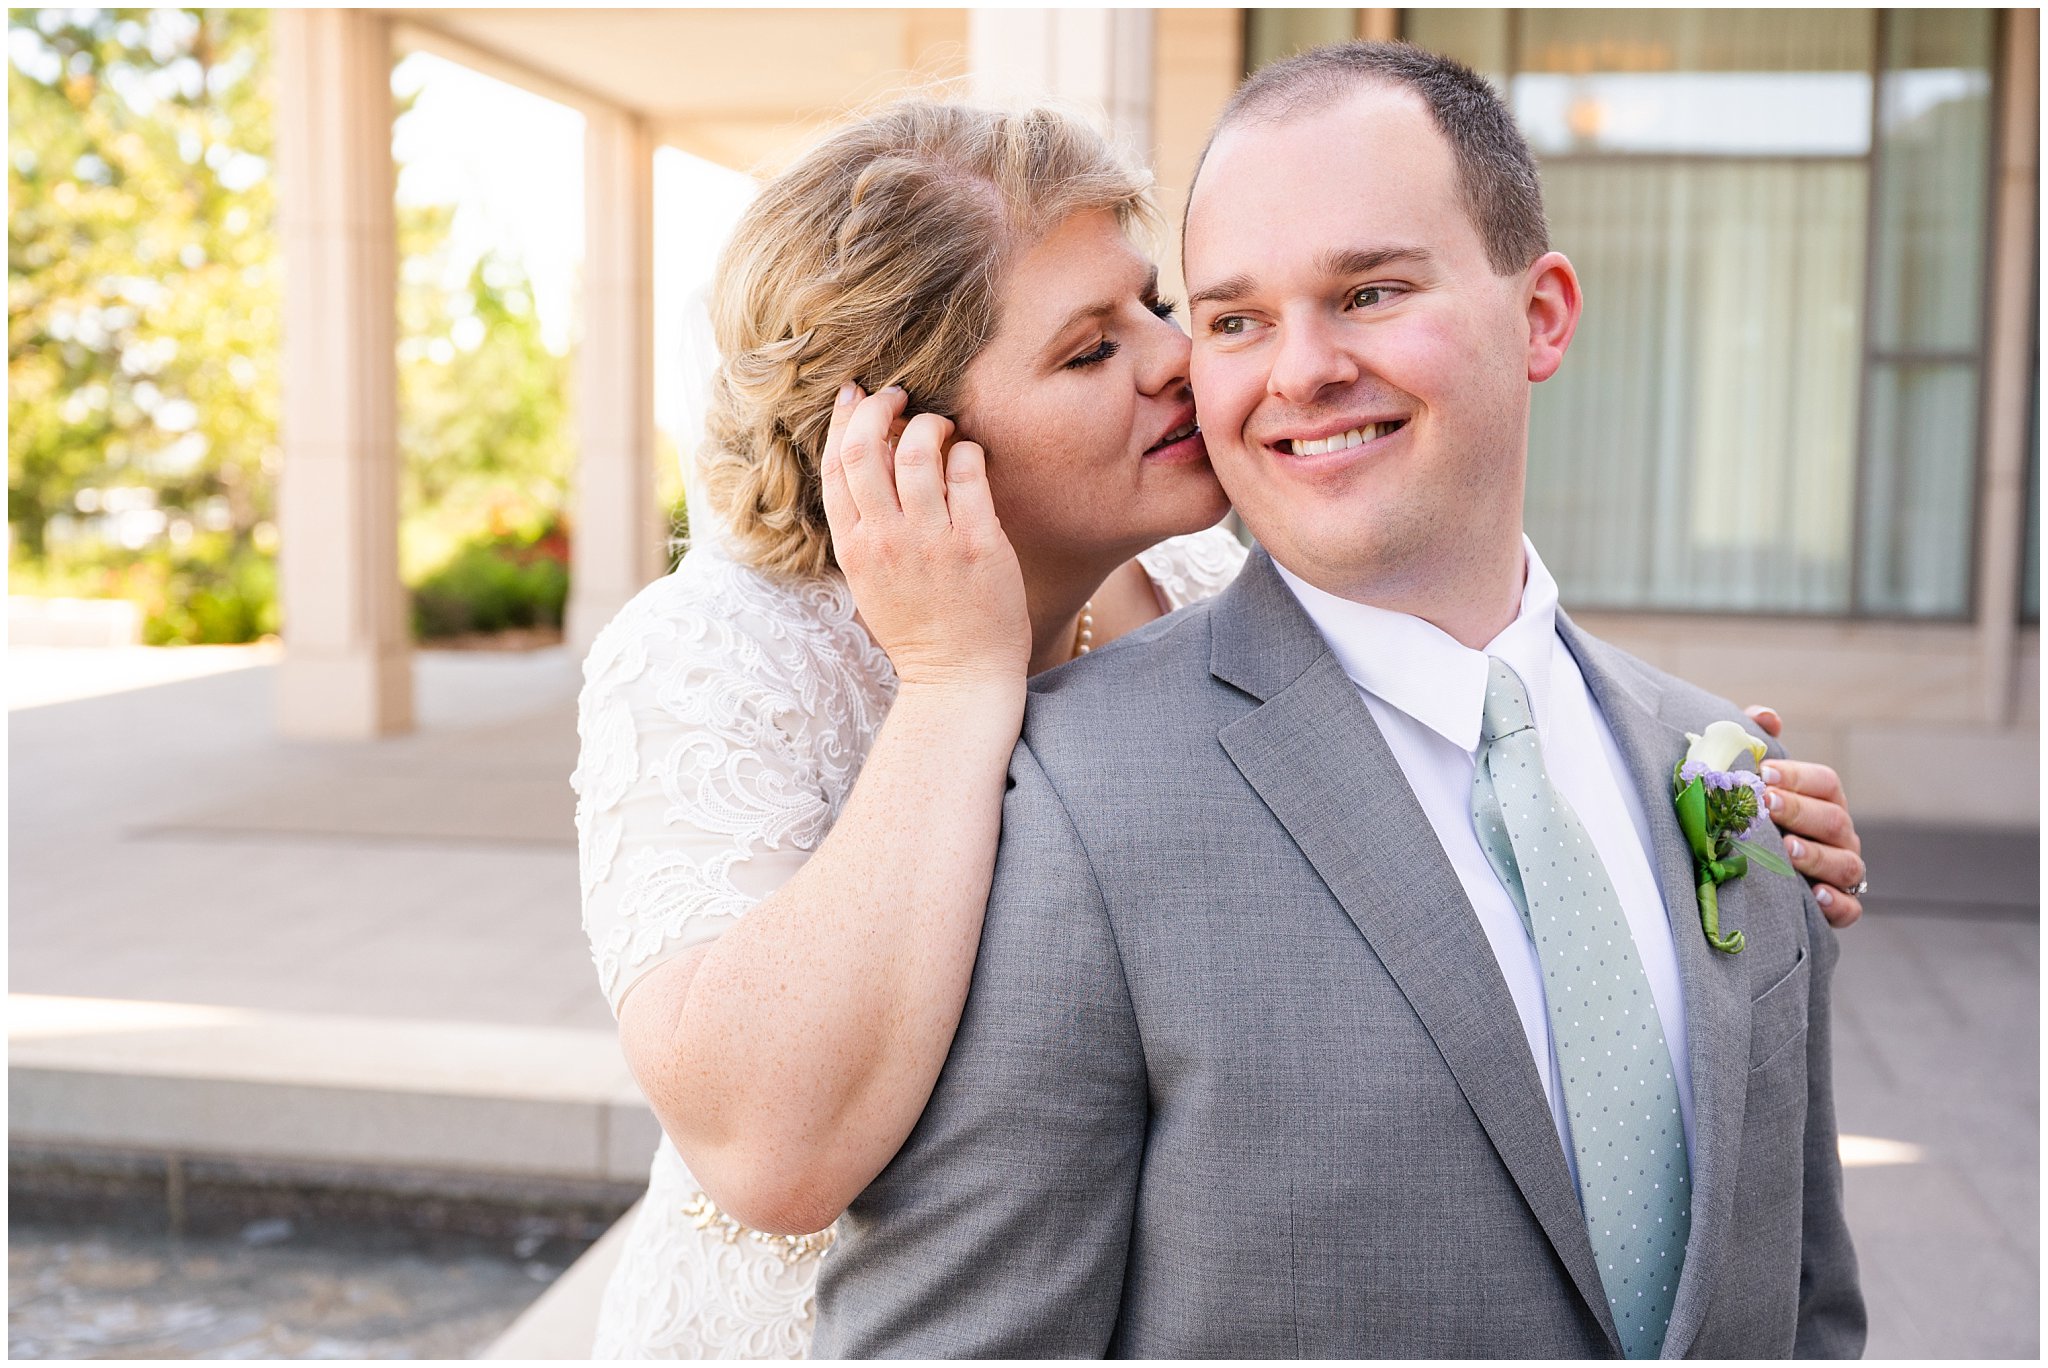 Bride and groom candid portraits at the temple | Oquirrh Mountain Temple and Millennial Falls Wedding | Jessie and Dallin Photography